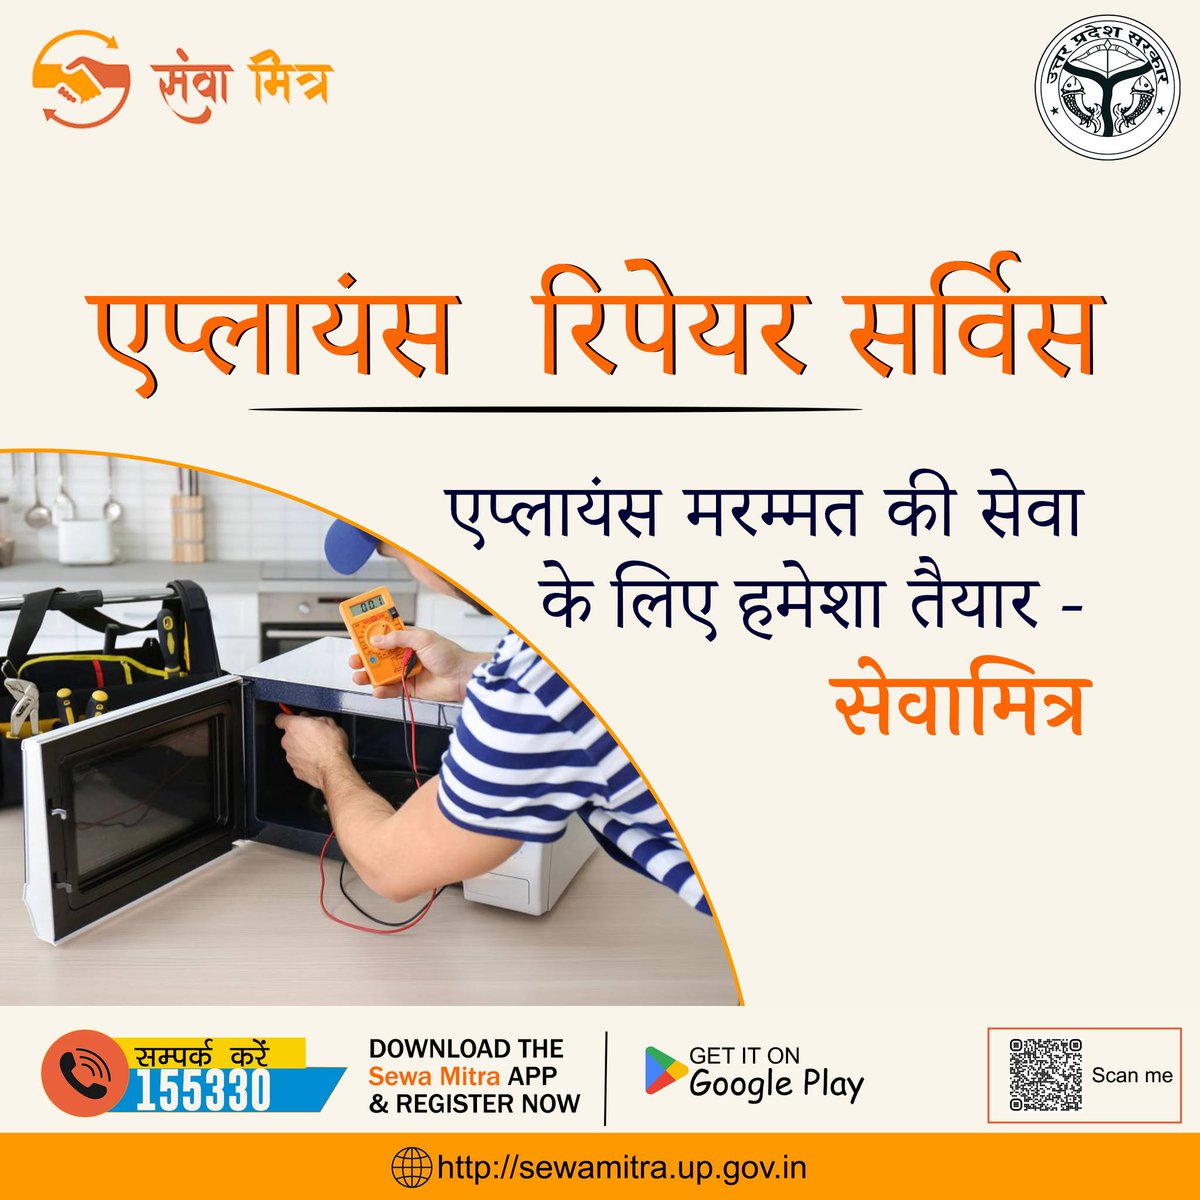 We're the certified Appliance Repair Experts, Saving You Time & Money with Same-day Appliance Repair Service!🛠️🏡

Call 155330 or visit sewamitra.up.gov.in

@dmbareilly @dmbas_ @BalrampurDm
#appliancerepair #homeappliancerepair  #sewamitraservices #sewamitraportal #samedayfix